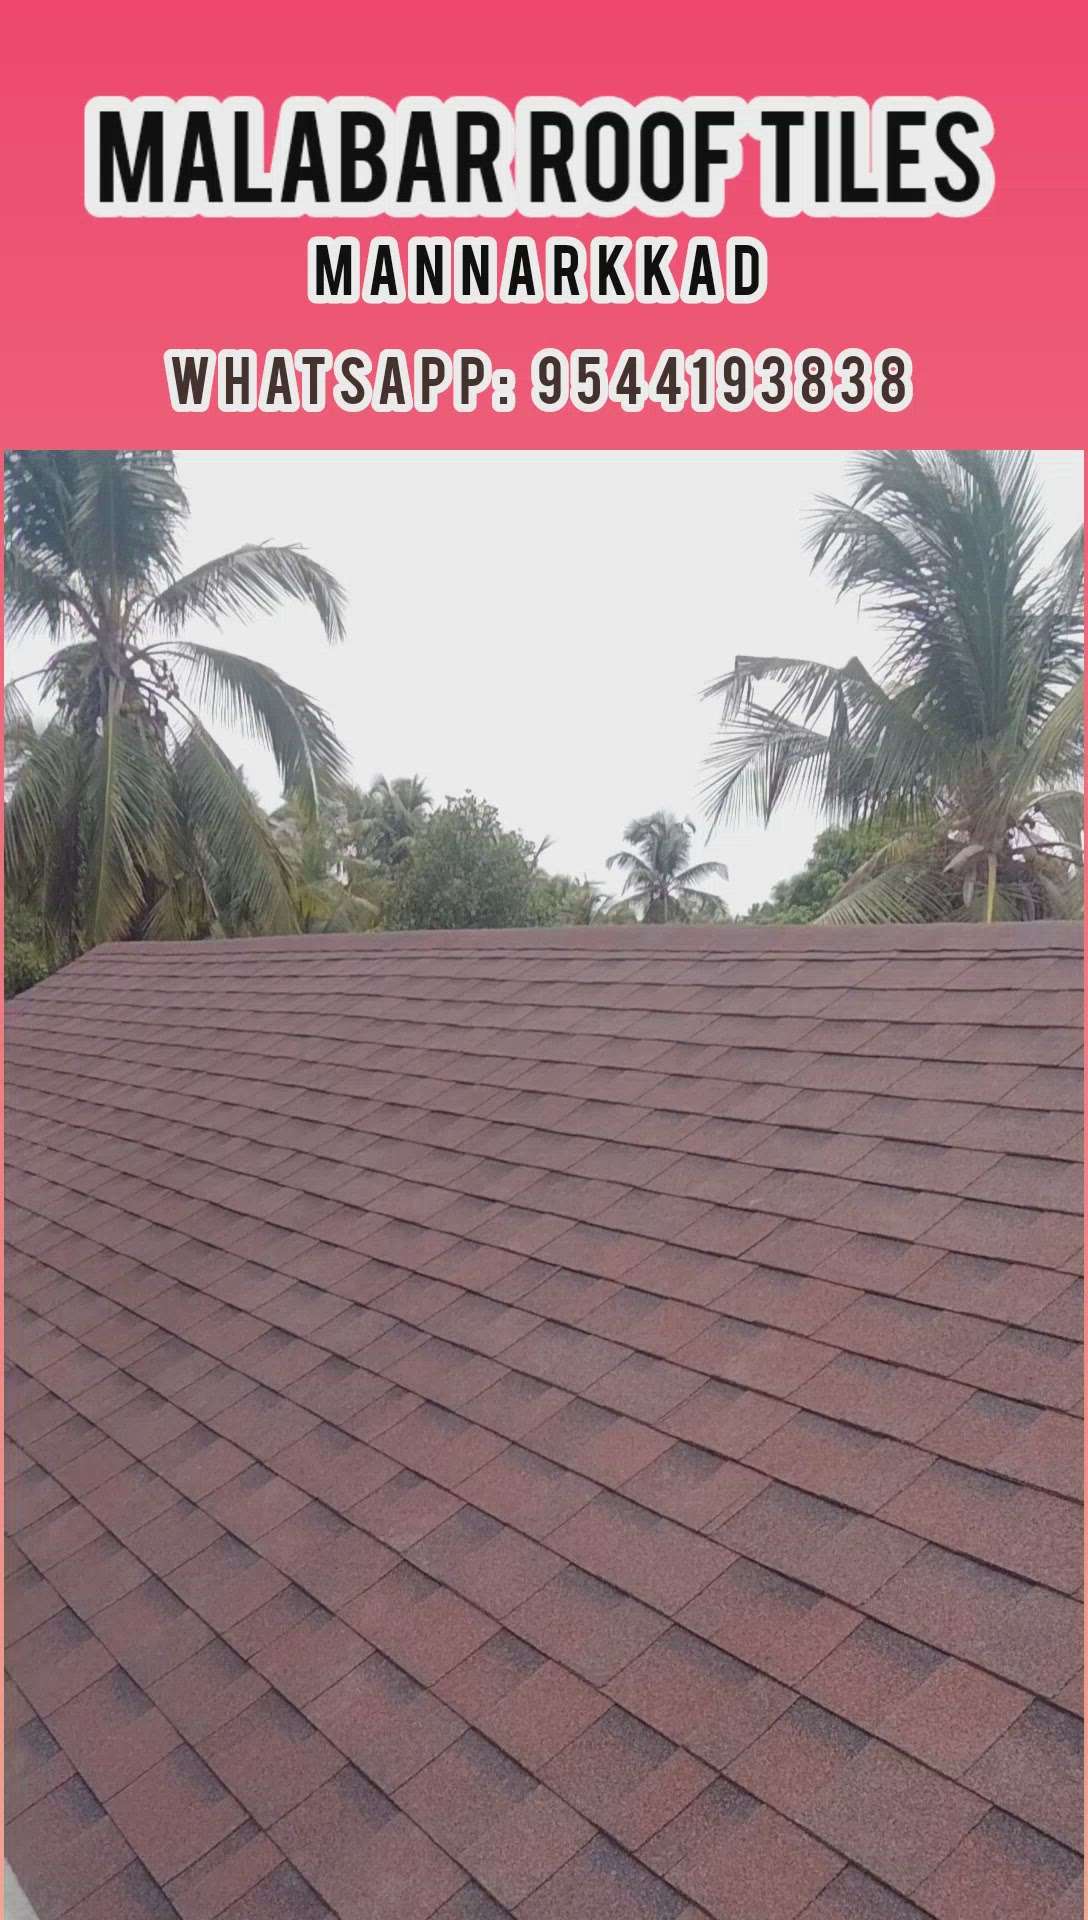 MALABAR ROOF TILES MANNRKKAD
ROOFING SHINGLES WORK COMPLETED SITE PAYYANUR
1900 SQUARE FEET AREA USA PRODUCT . 
WHATSAPP OR CALL 9544193838